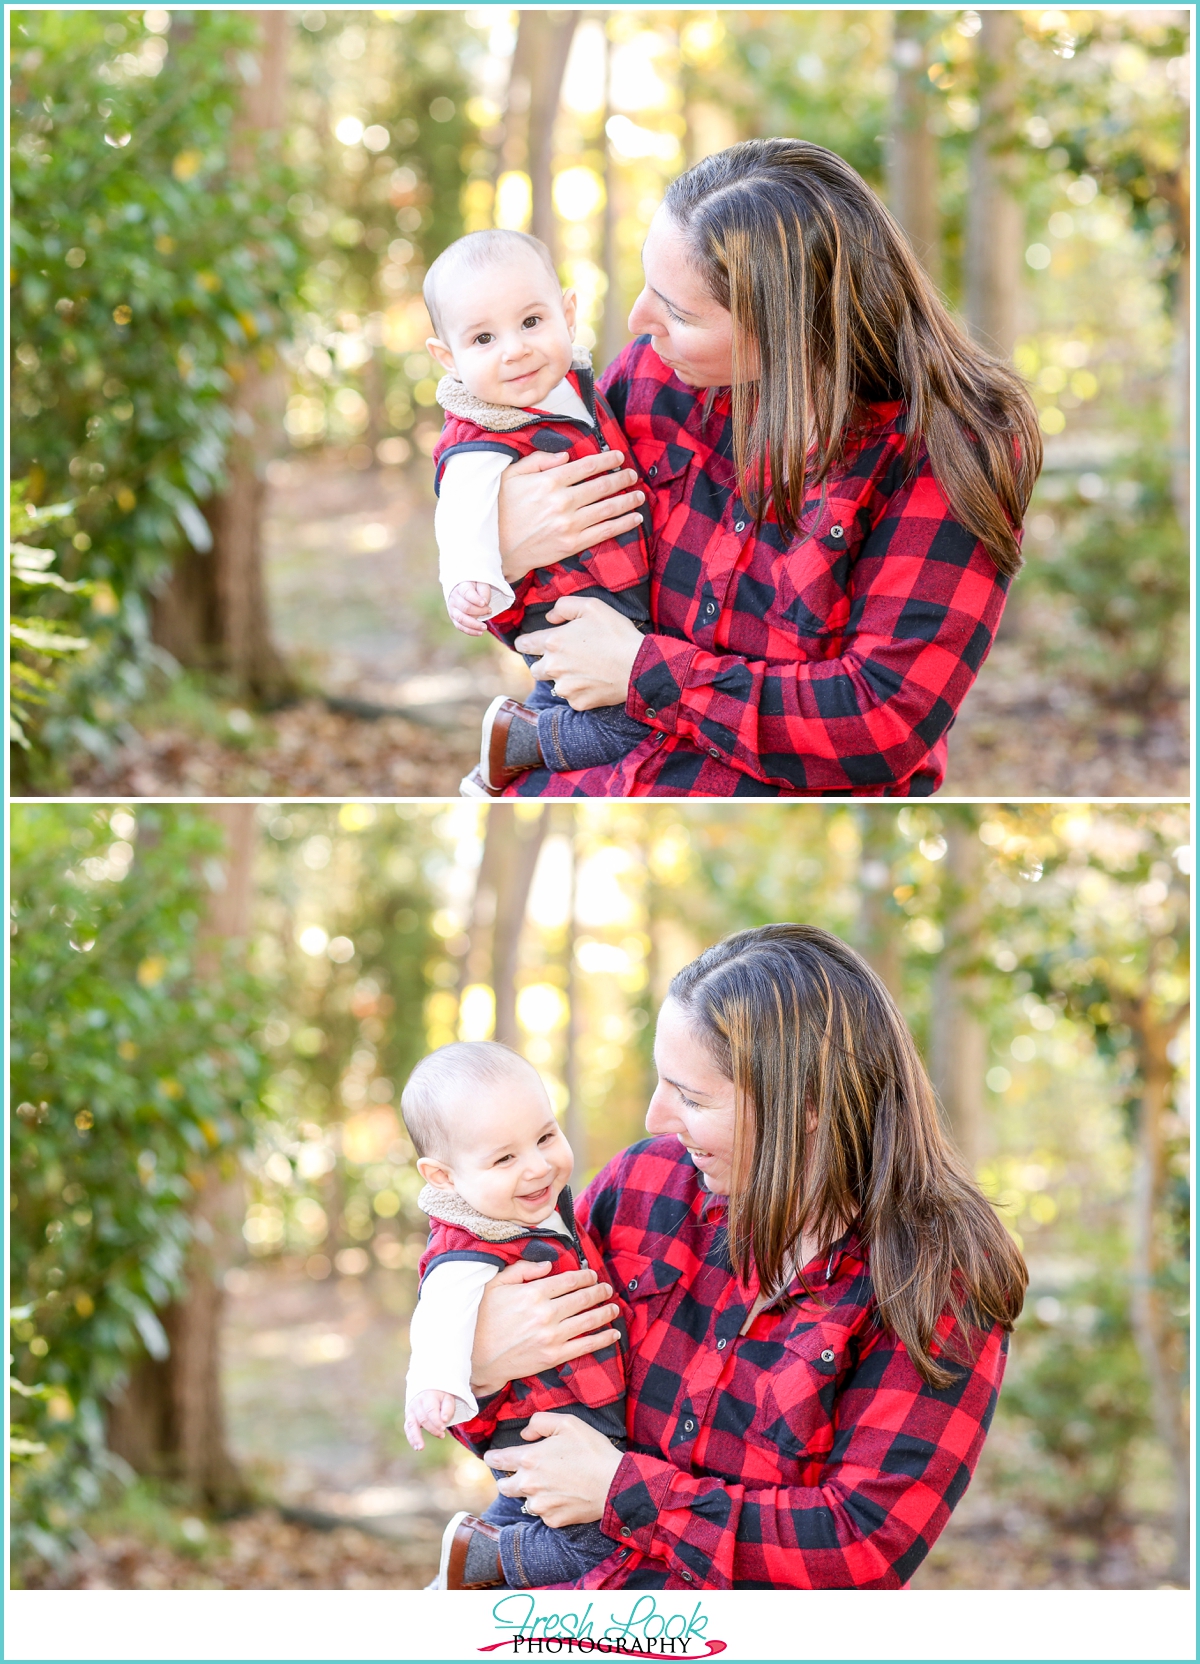 laughing with mommy in plaid outfits